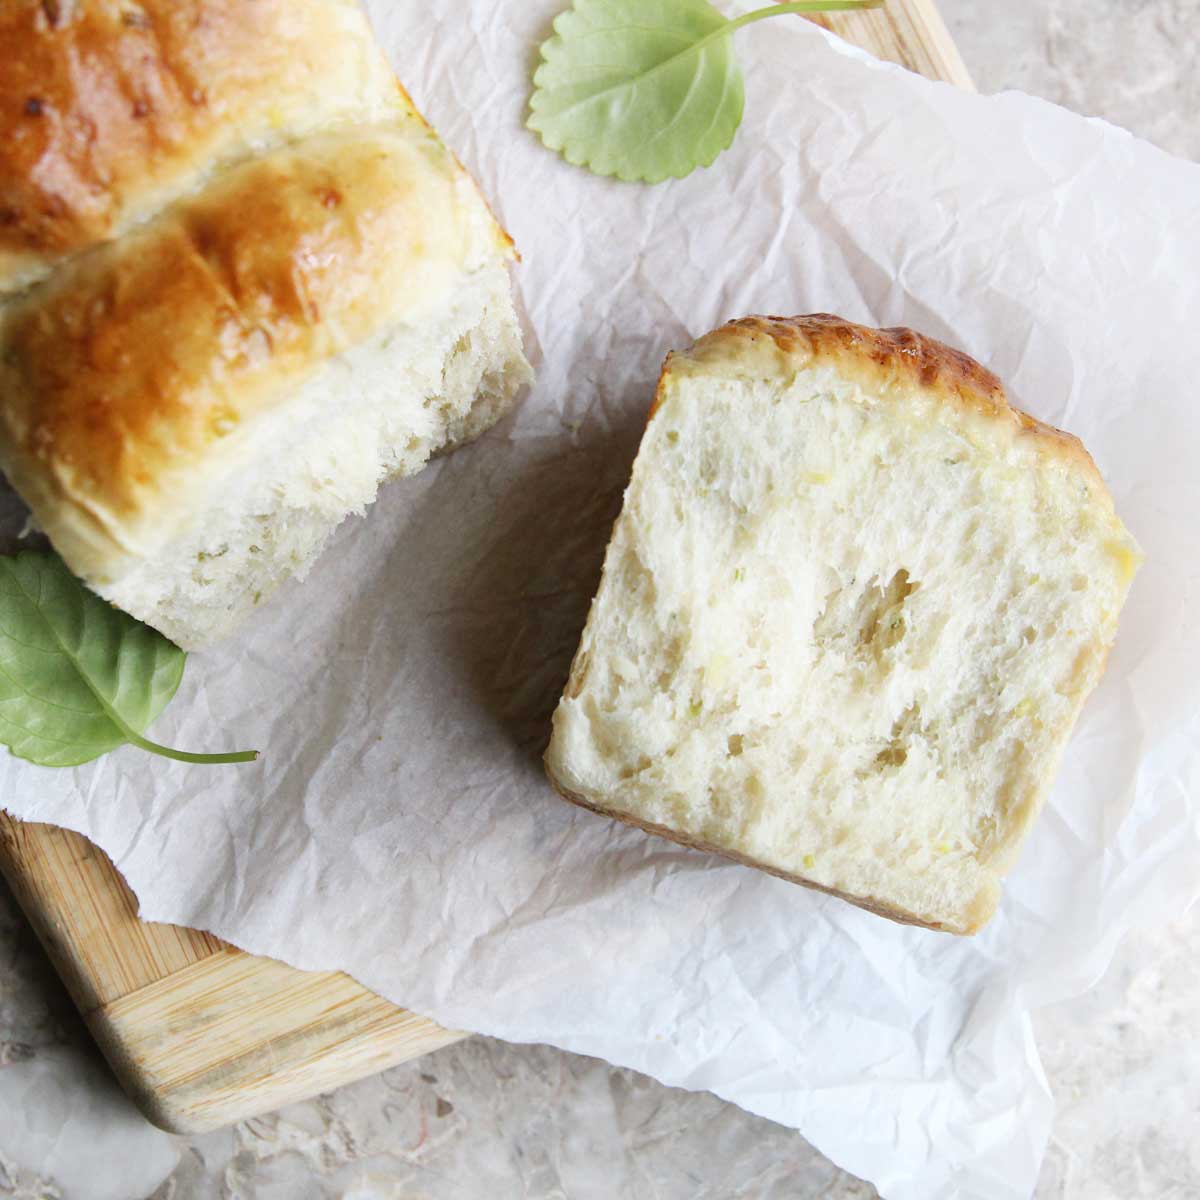 Vegan Cauliflower & Chive Yeast Bread Recipe for Sandwiches, Toasts and More! - Lentil Flatbread